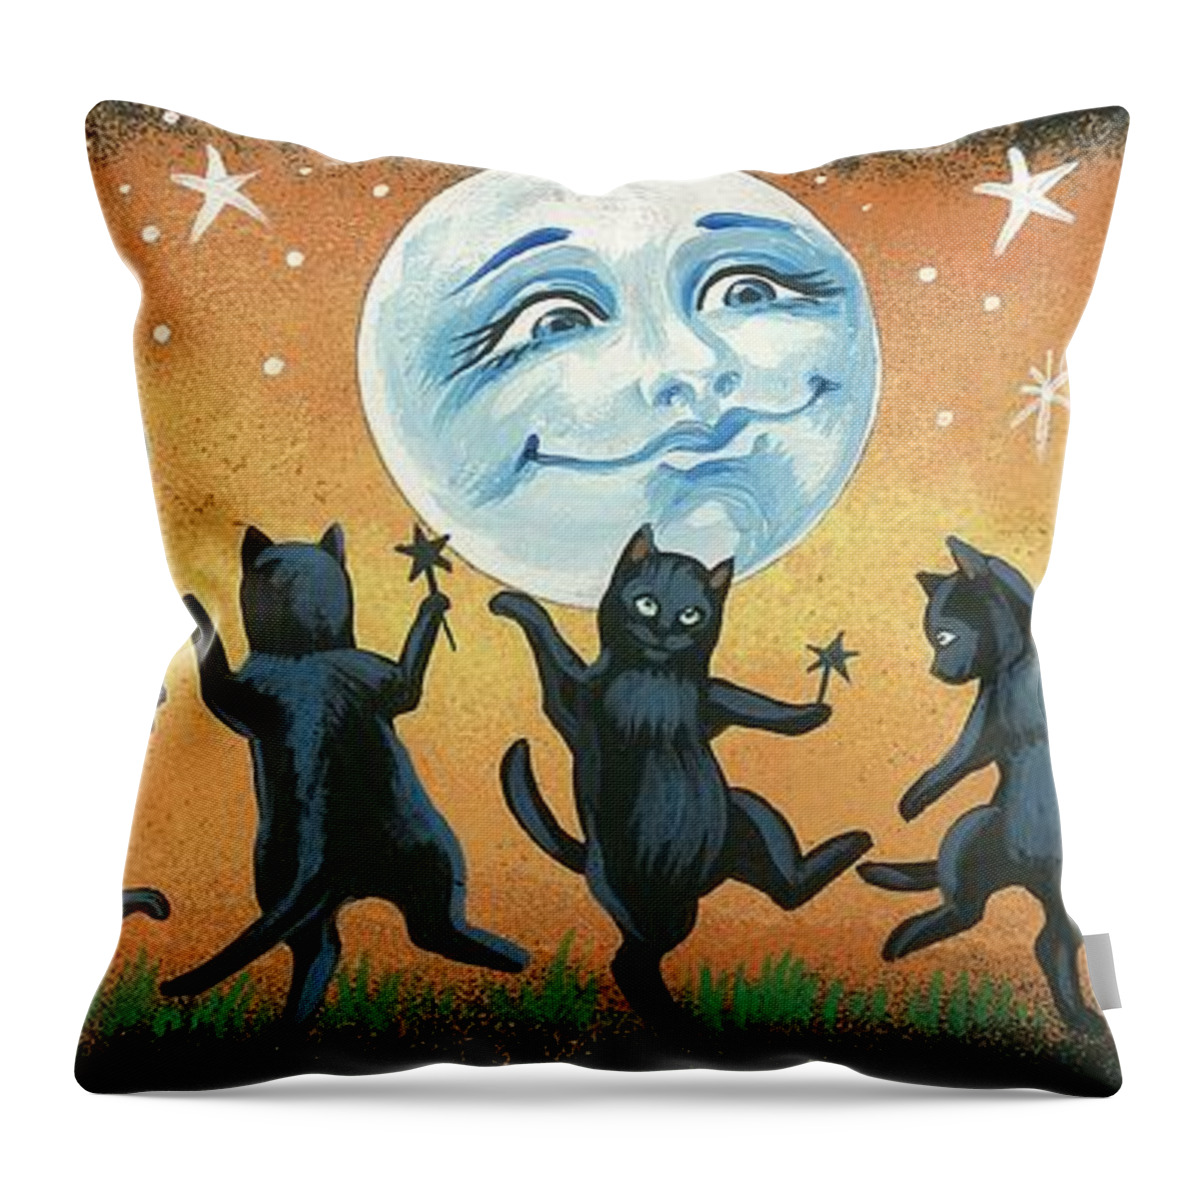 Ryta Throw Pillow featuring the painting Dance Of The Black Cats by Margaryta Yermolayeva